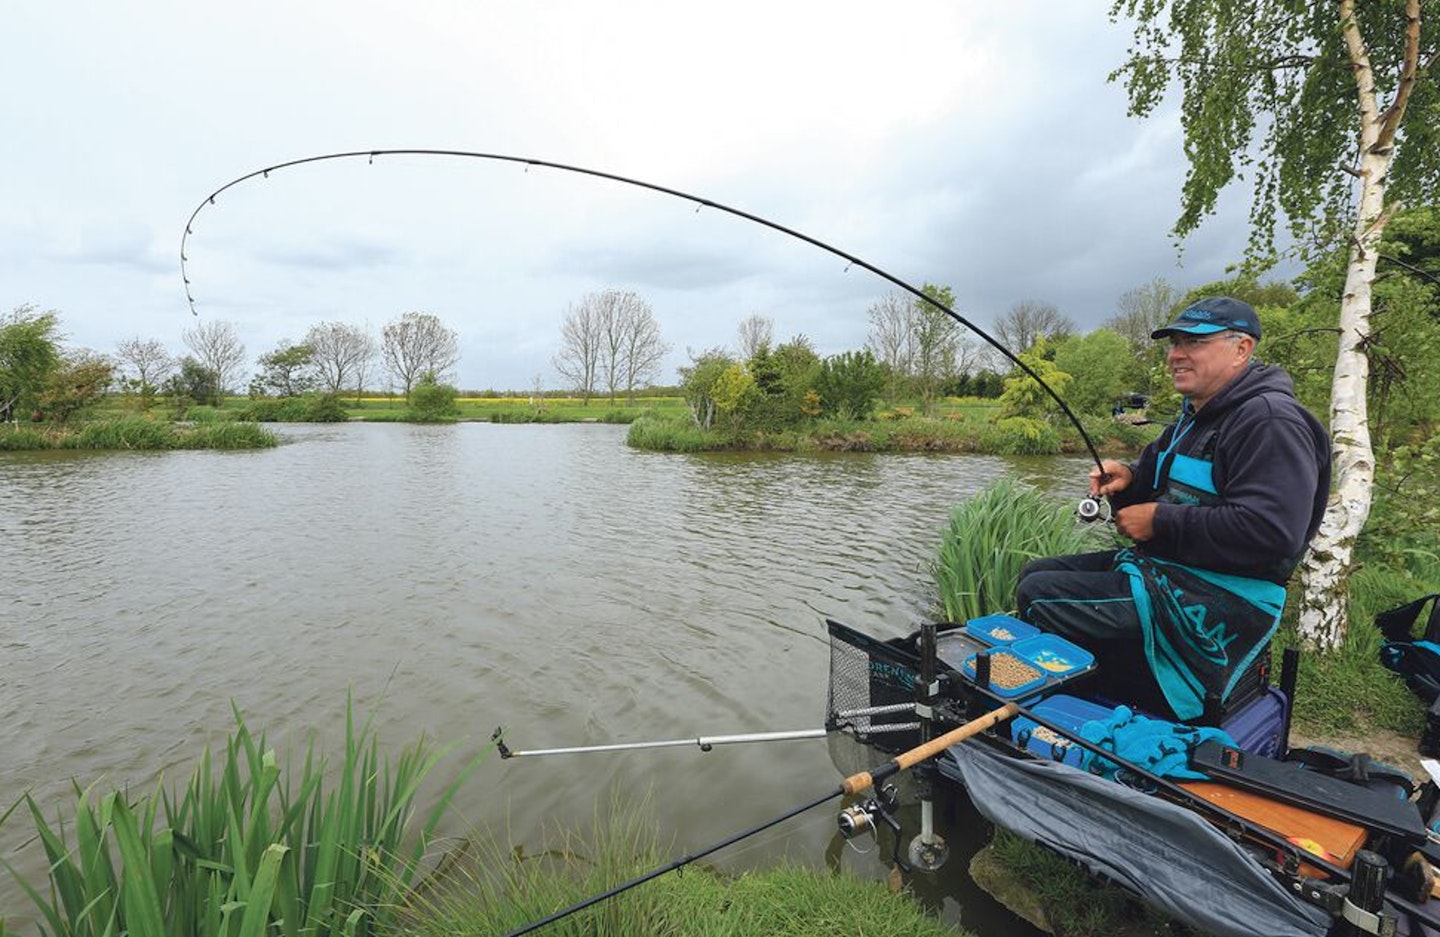 The original stocking of F1s at Lindholme , is still going strong after more than 20 years